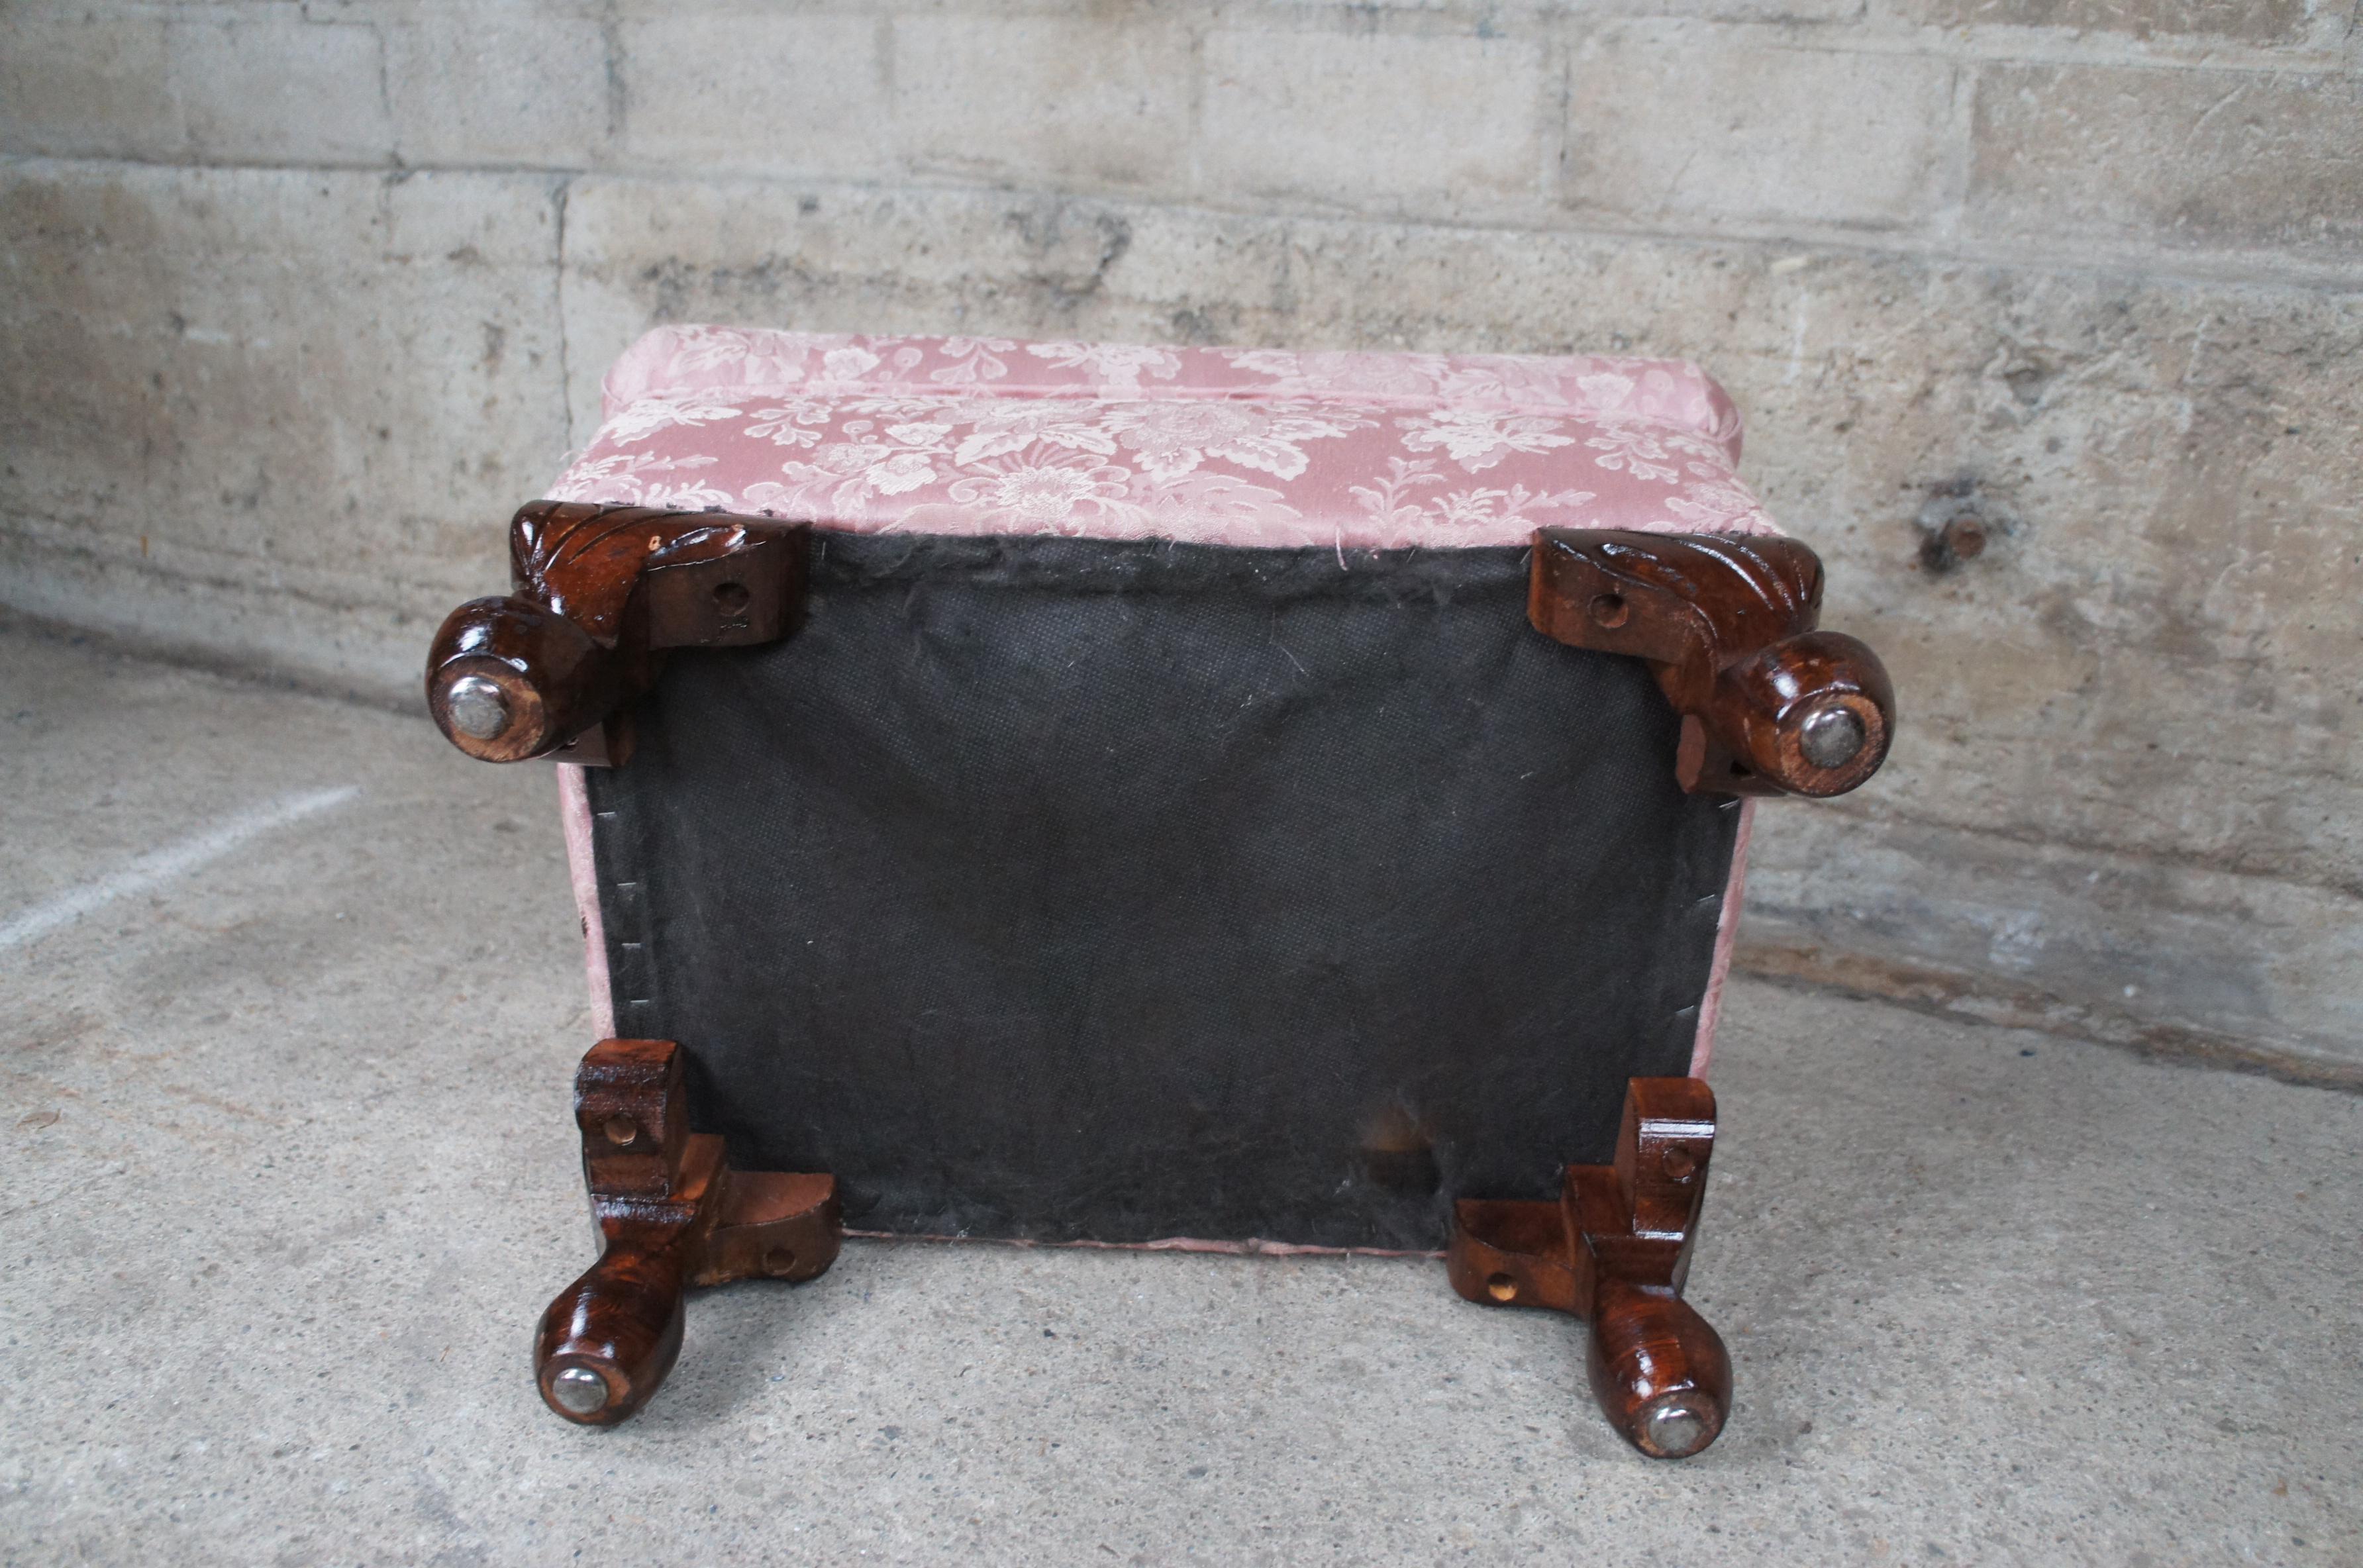 Vintage Queen Anne Floral Upholstered Walnut Ottoman Foot Stool Vanity Pouf Pink For Sale 2